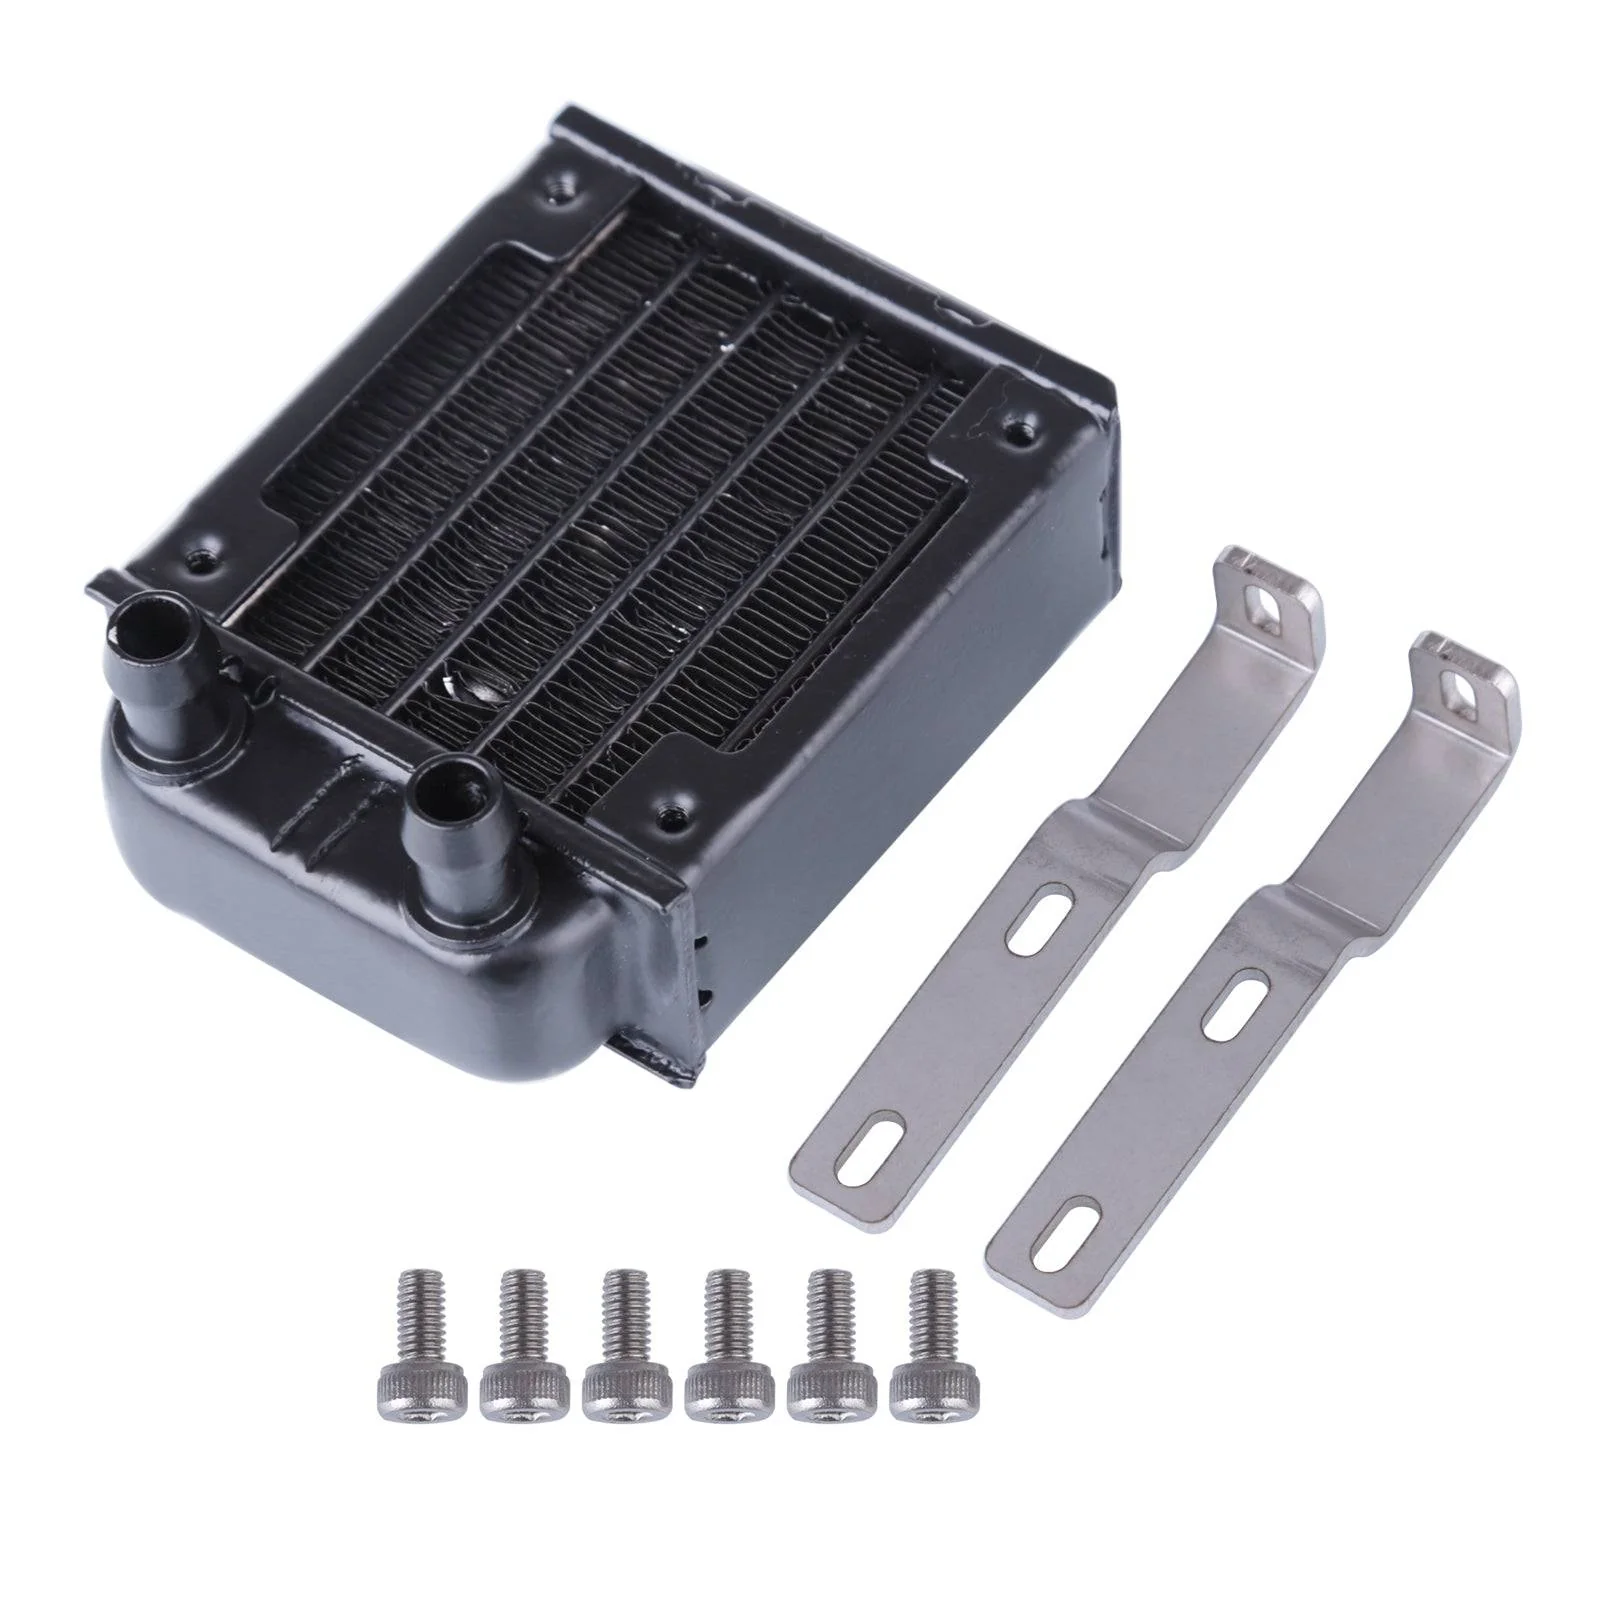 8.3 x 6 x 3.7cm Water-cooled Tank Radiator with Bracket Kit for Toyan Single-cylinder 4-Stroke Engine 2